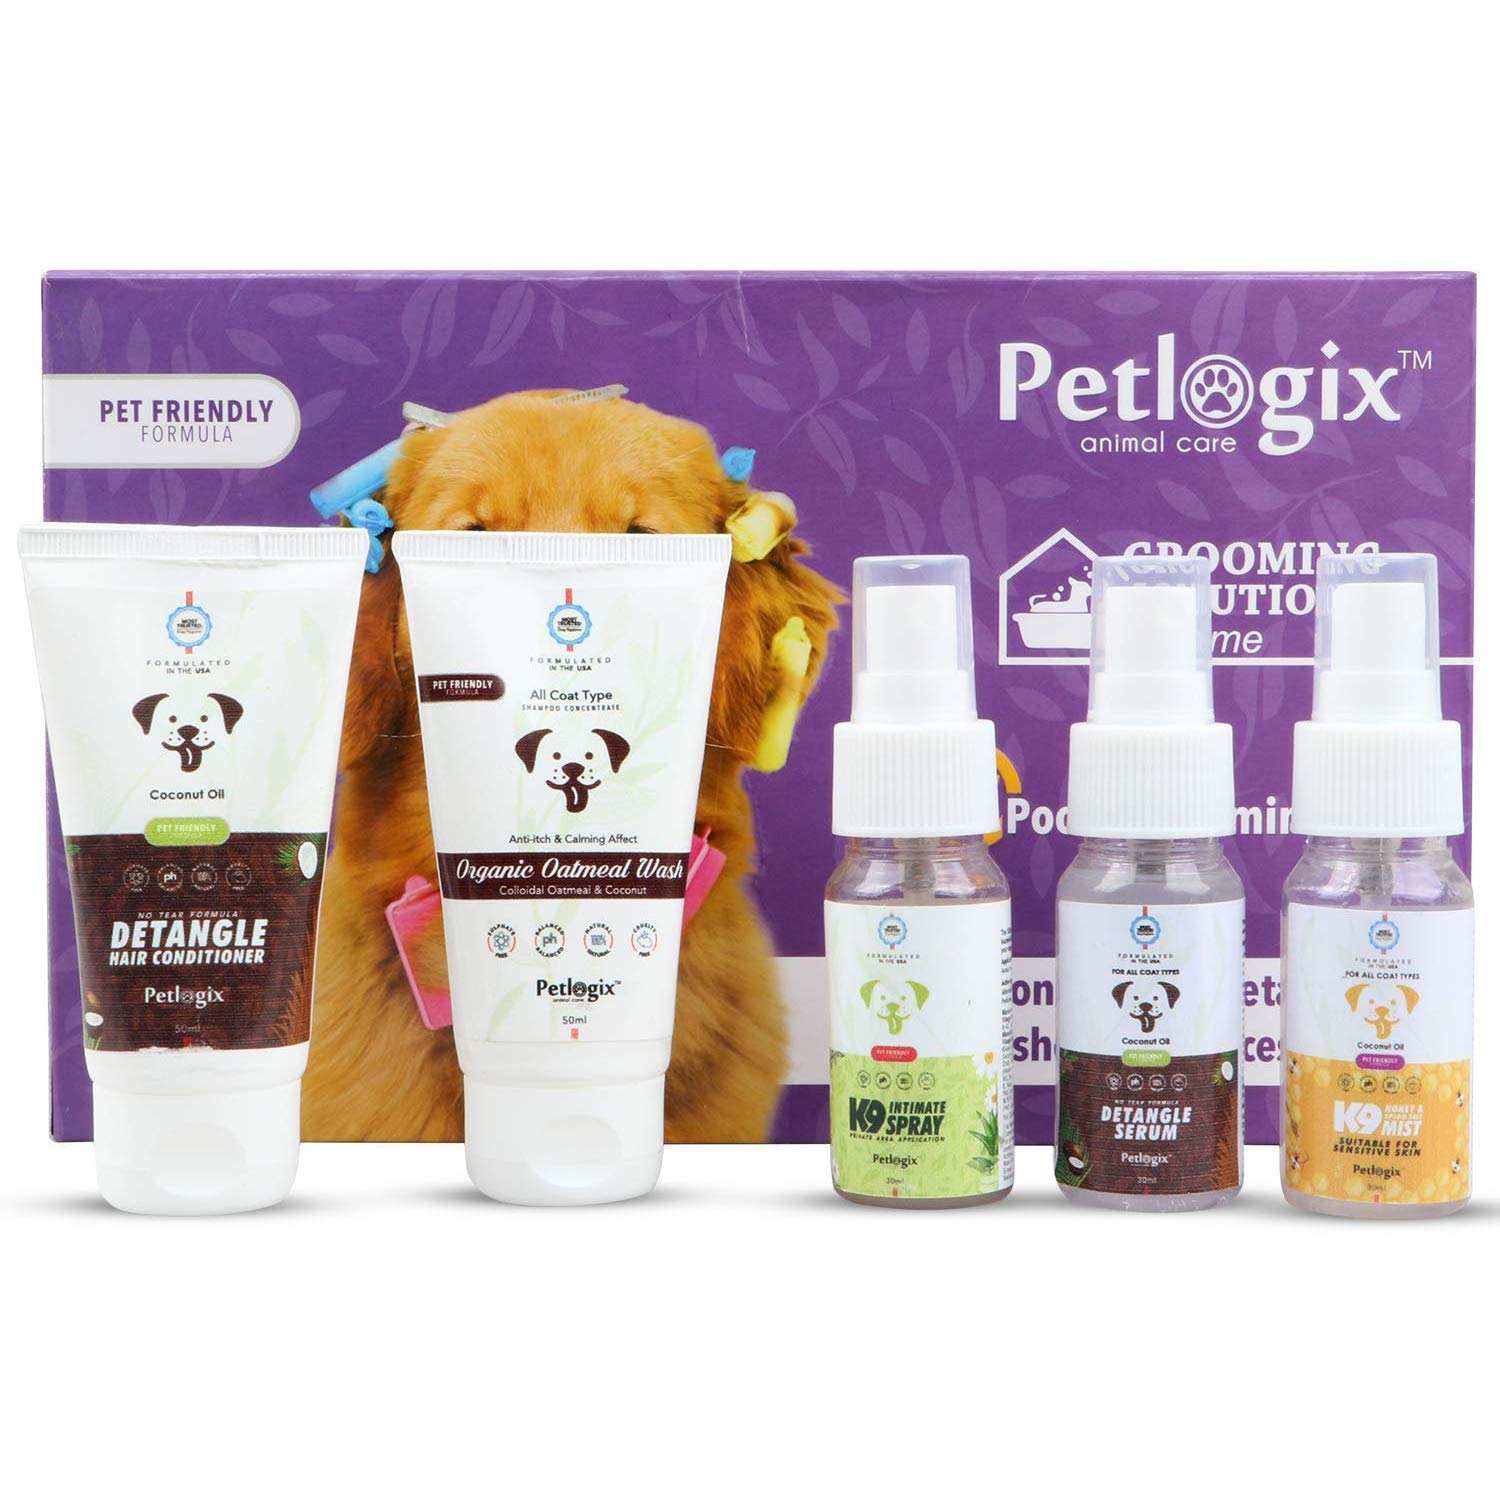 Petlogix Natural 5 in 1 Pooch Grooming Sulphate Free Kit for Pet Dog & Puppy - Cleans, Conditions, Detangles, Desheds & Reduces Odor, 190g